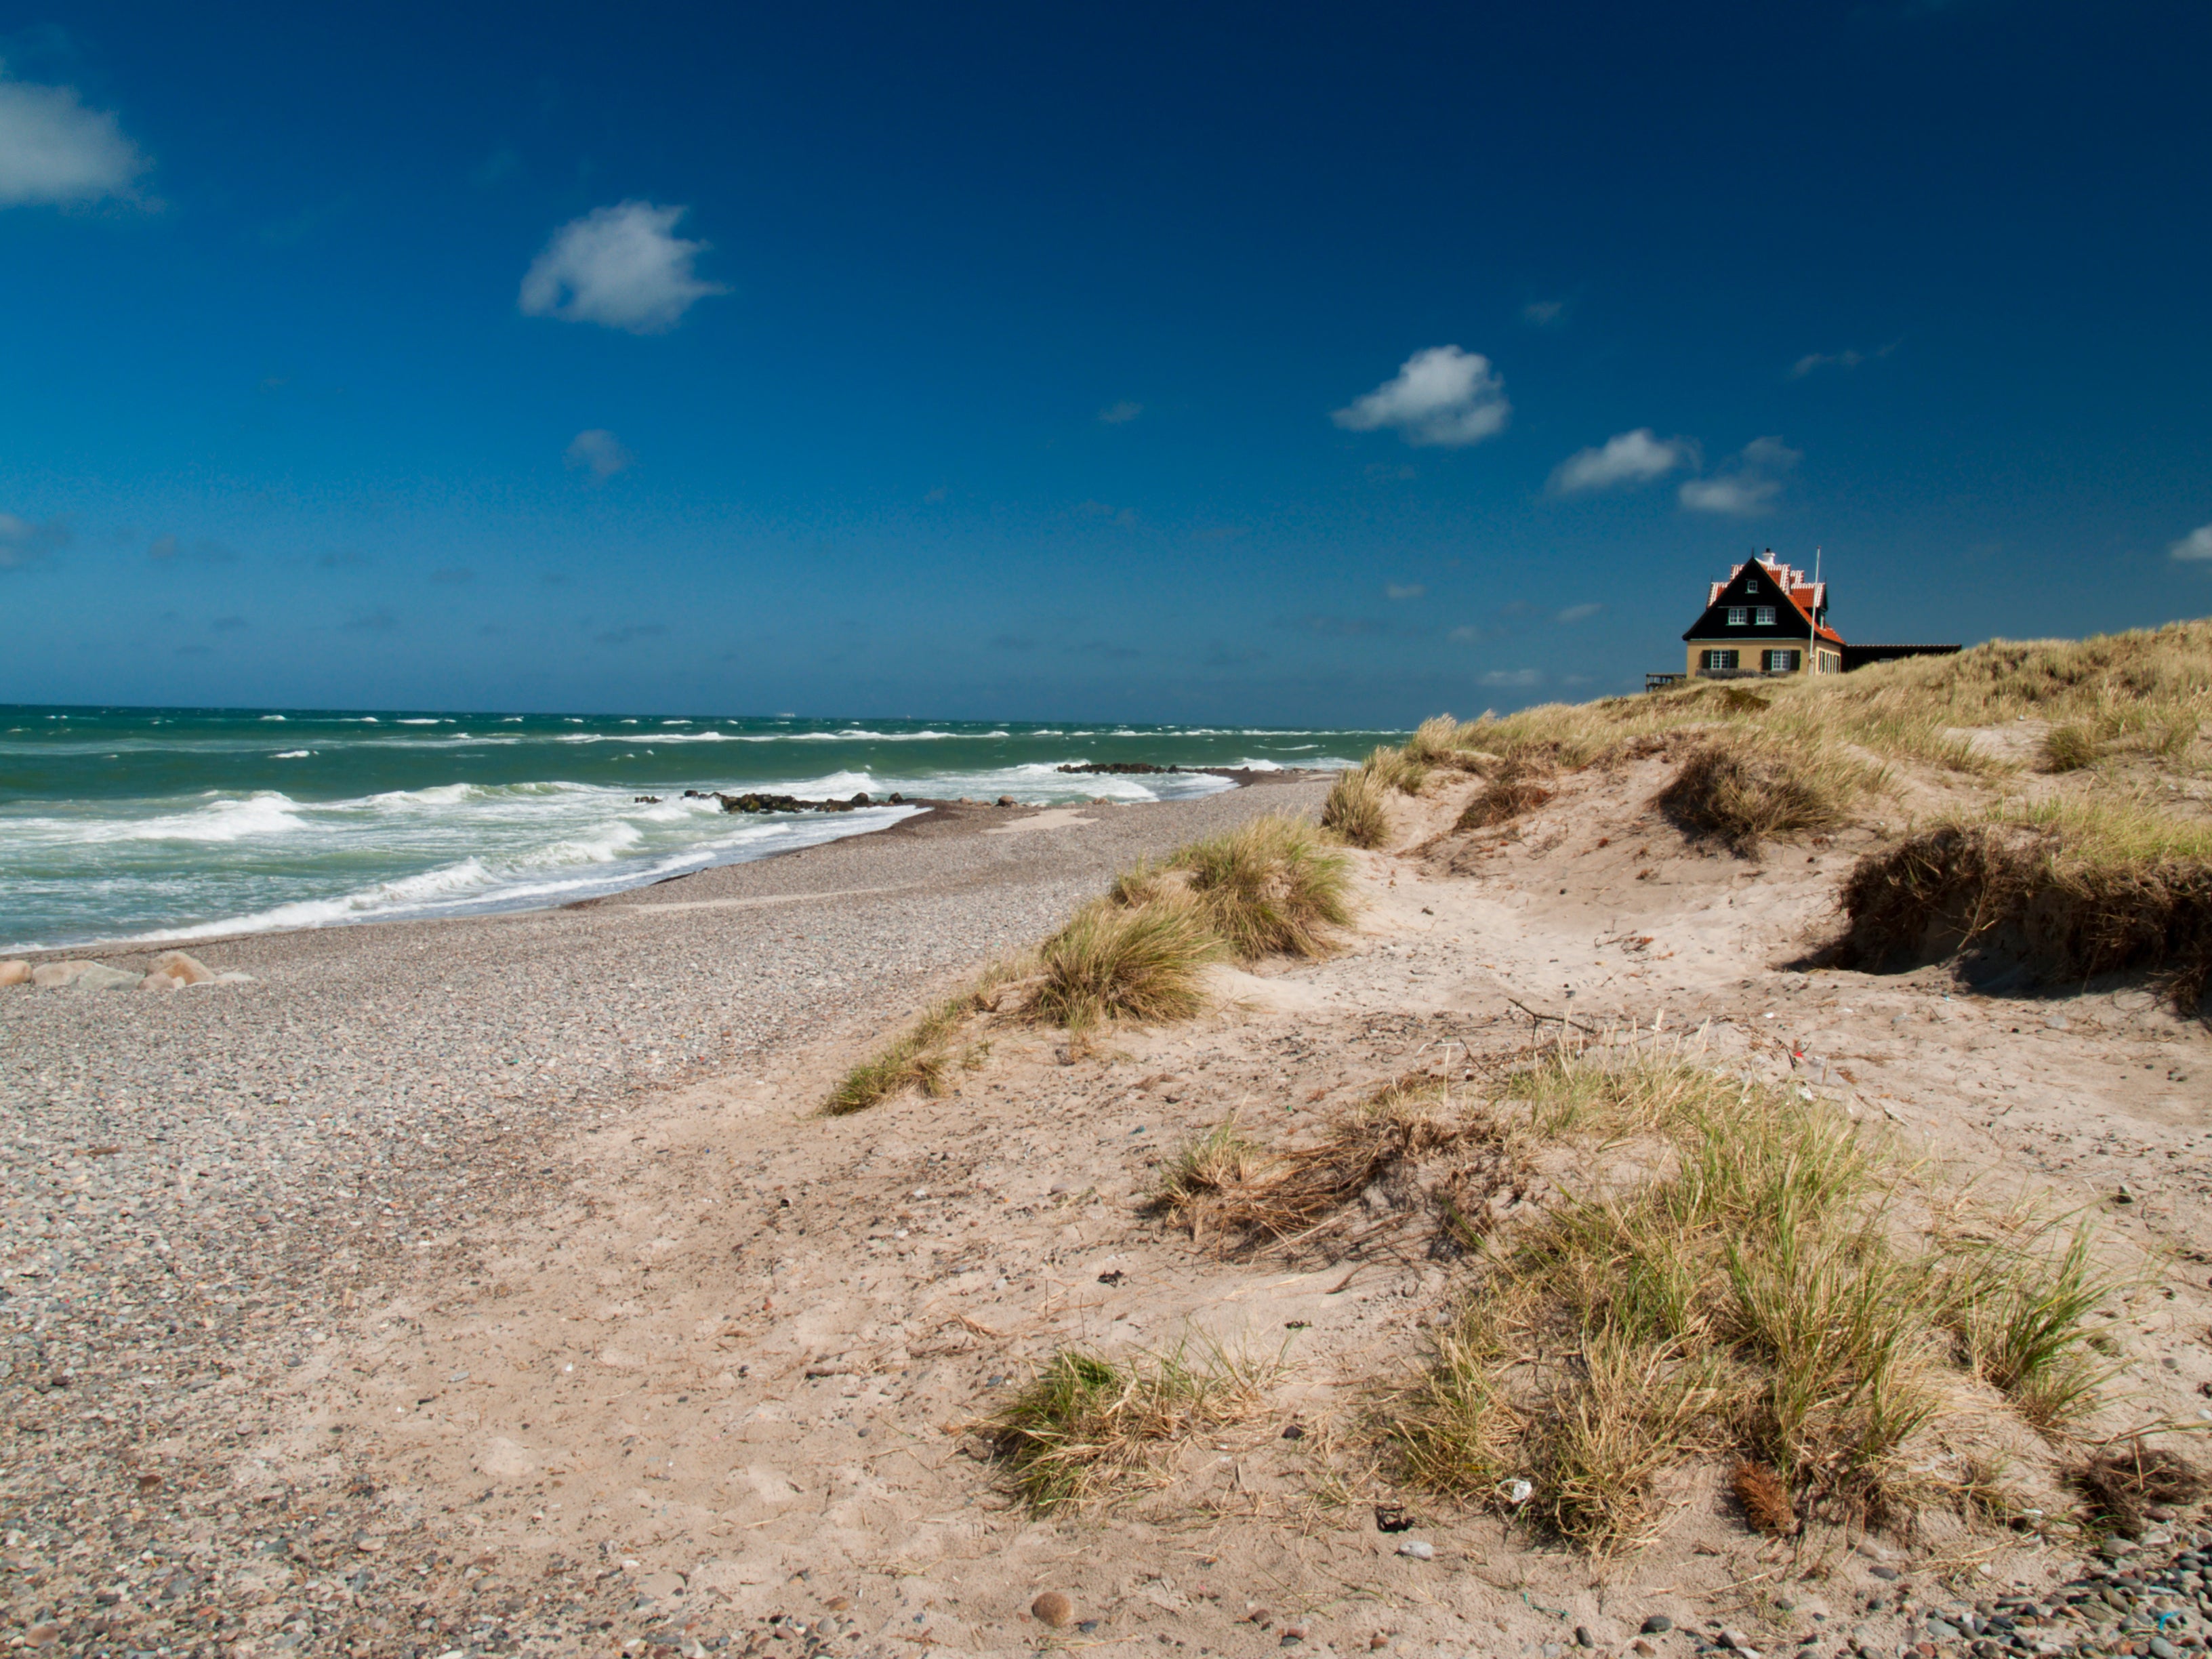 Skagen, at the tip of North Jutland, makes for a great Danish seaside holiday